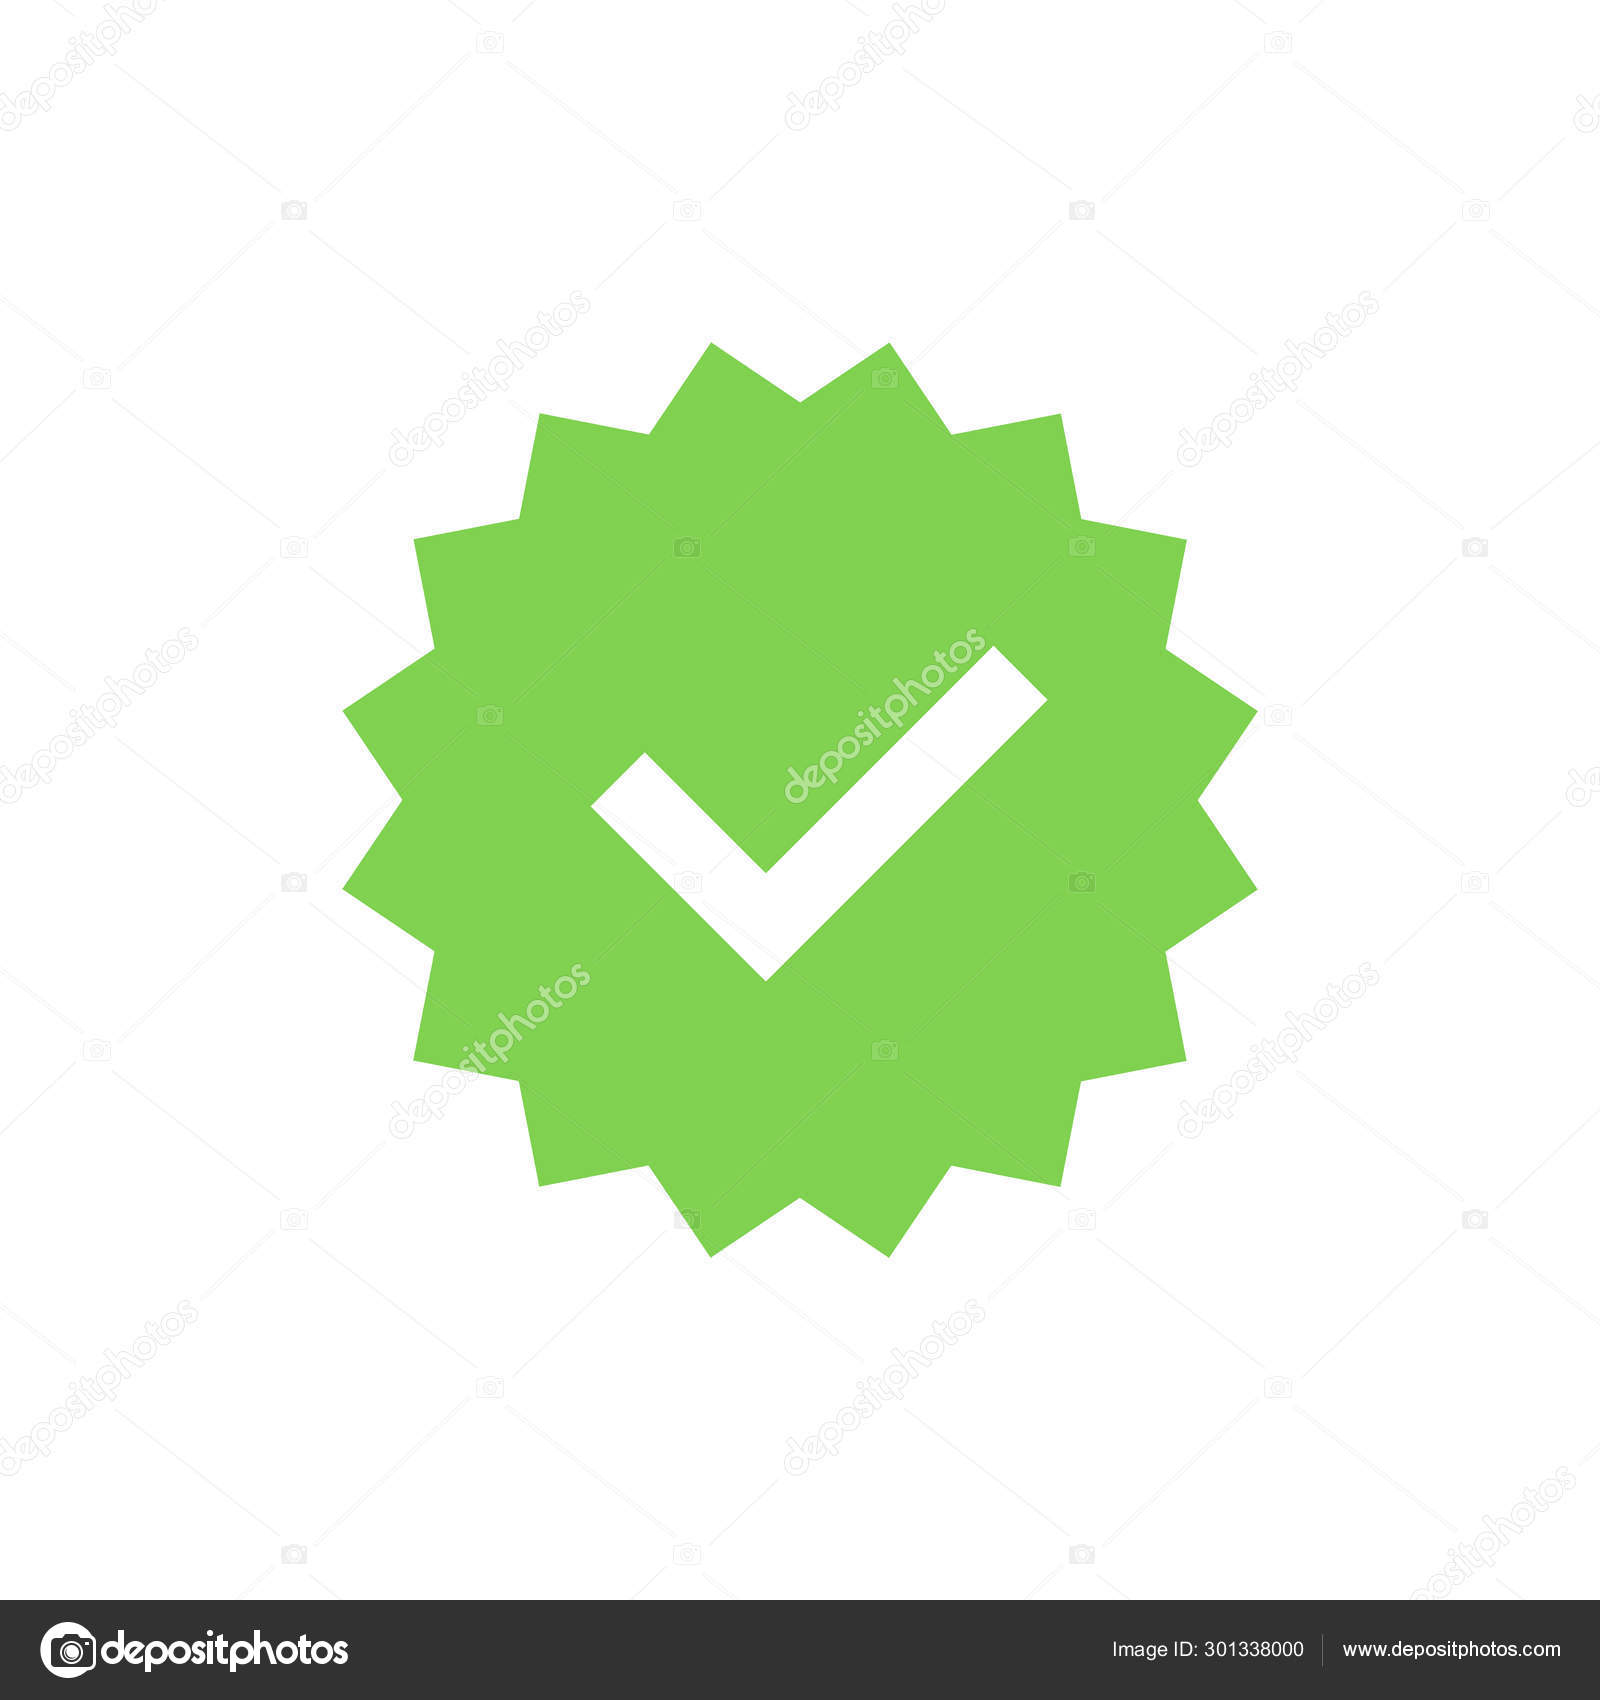 Check Mark Icons Green Tick And Red Cross Logo Verified Checkmark Emoji  Verification Badge Verified Account Symbol Similar To Twitter Stock  Illustration - Download Image Now - iStock